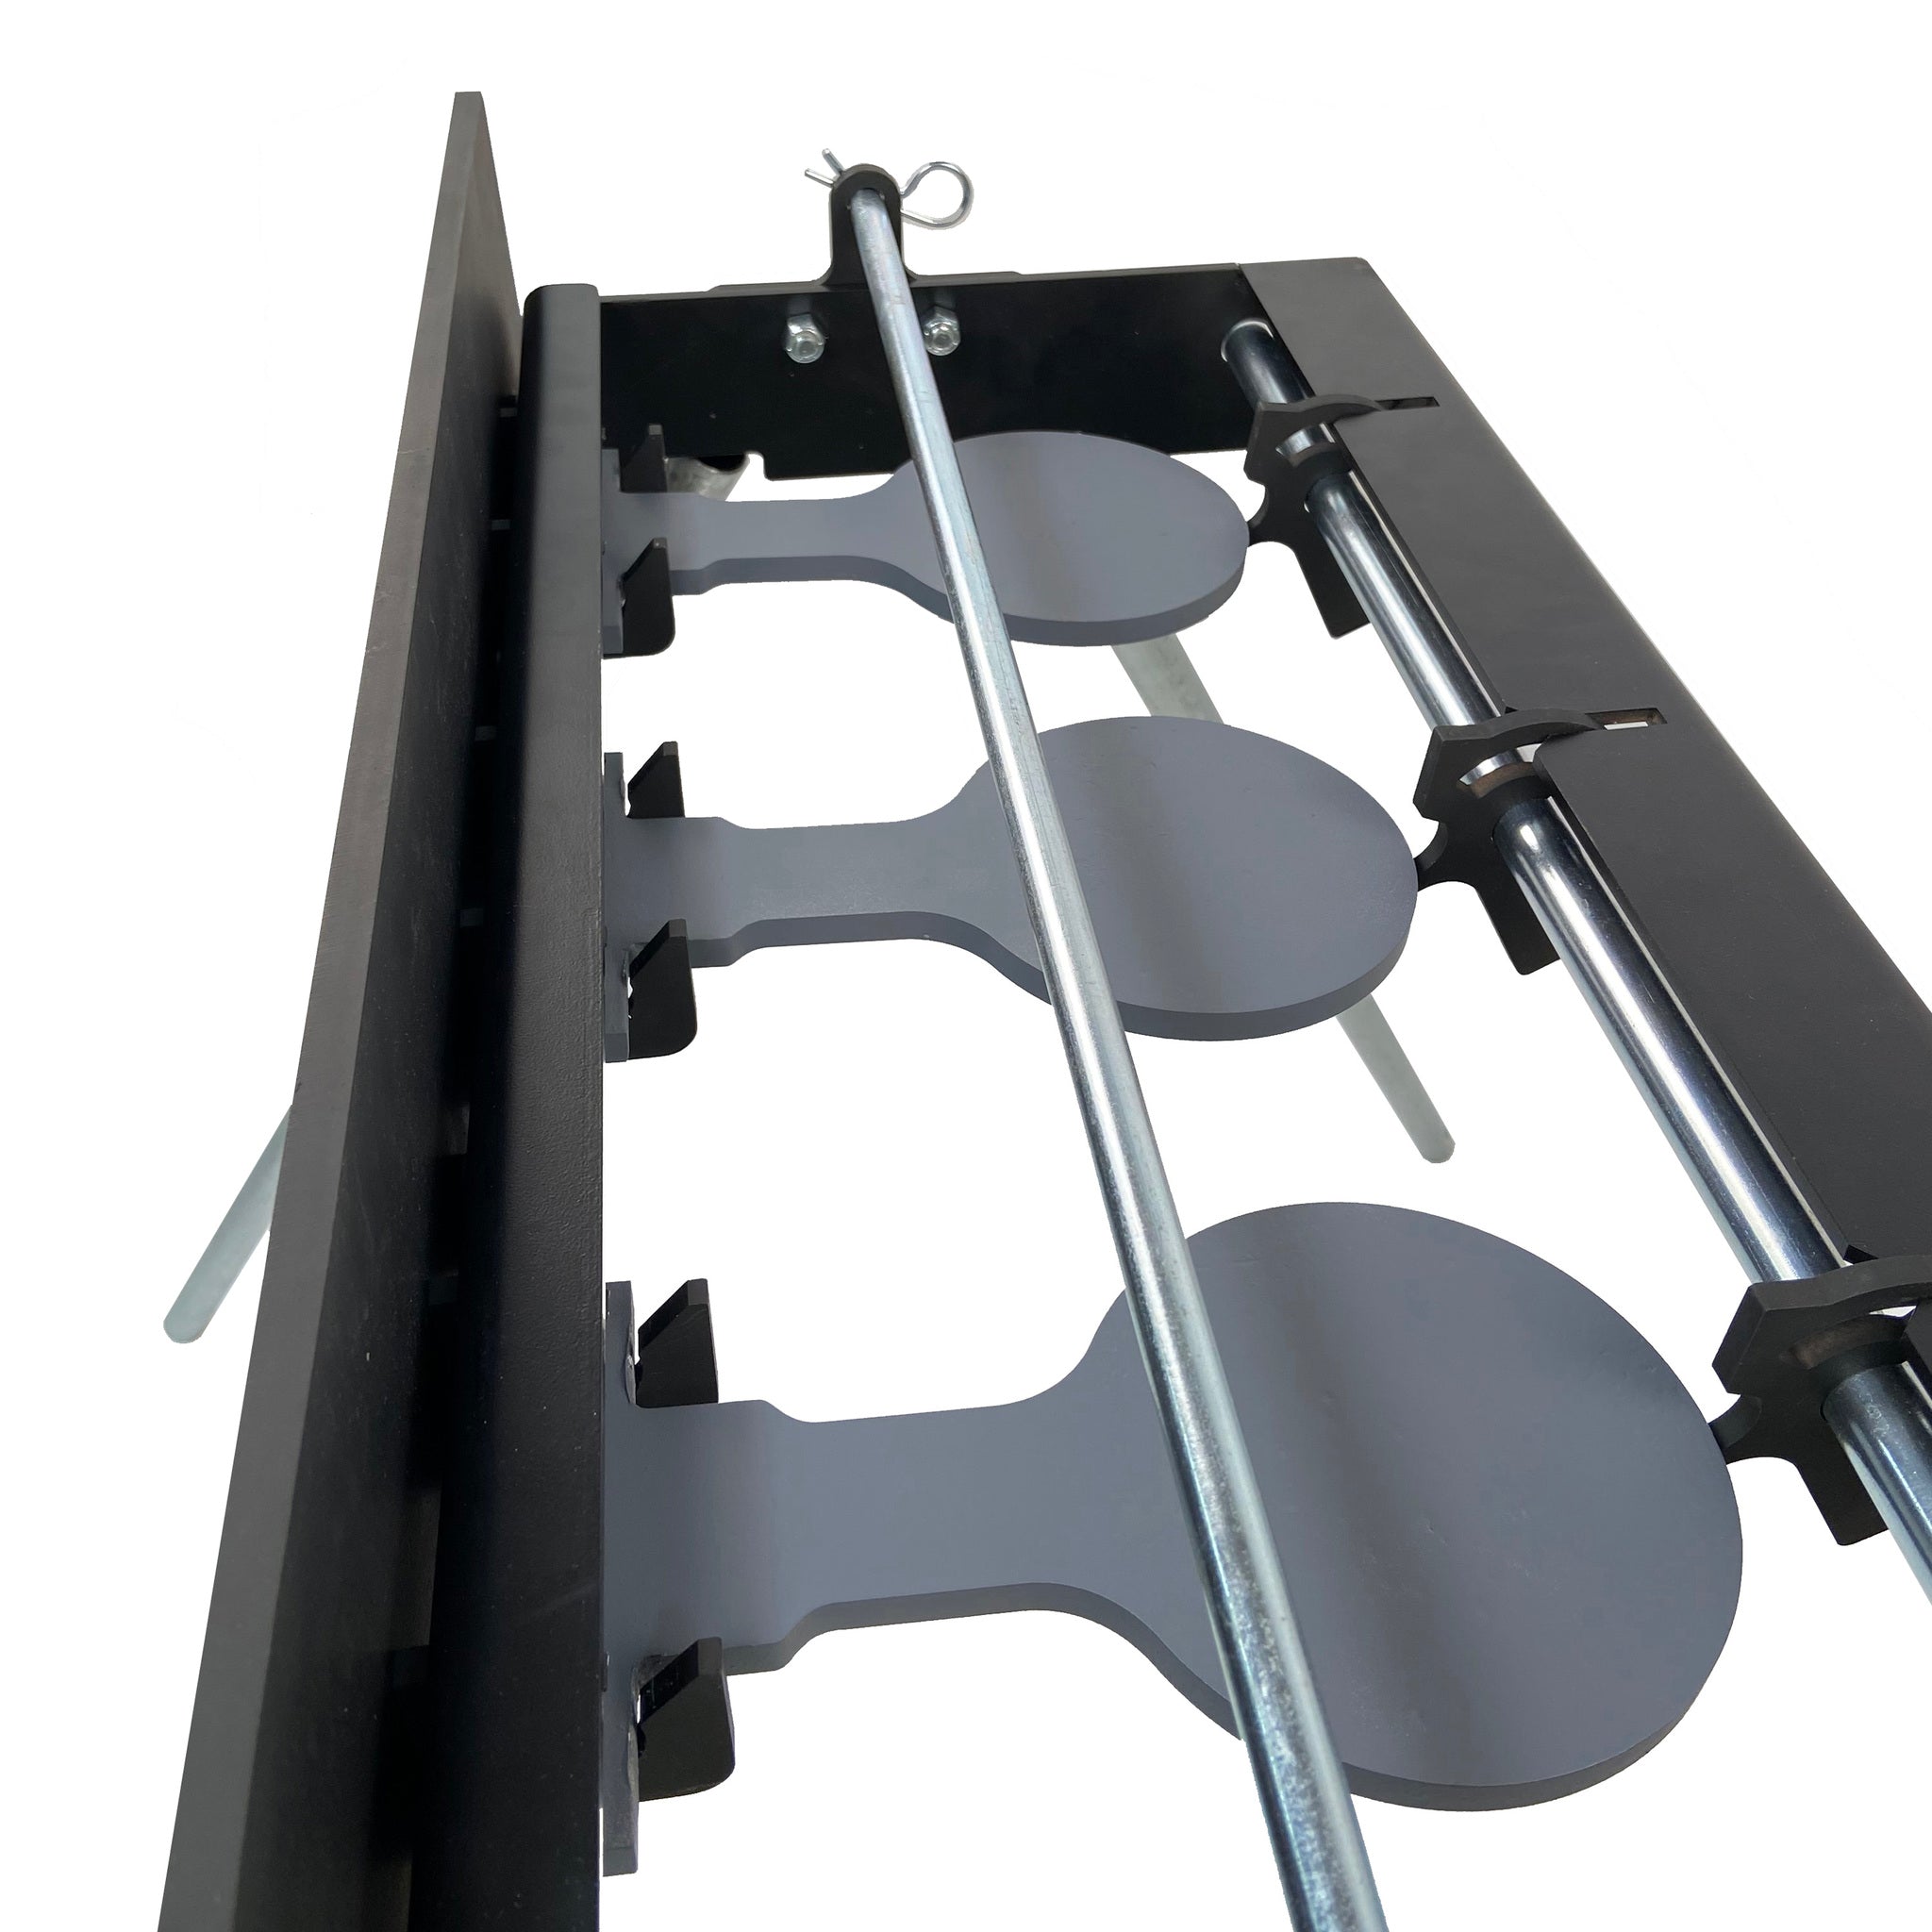 Shoot-to-Reset Plate Rack